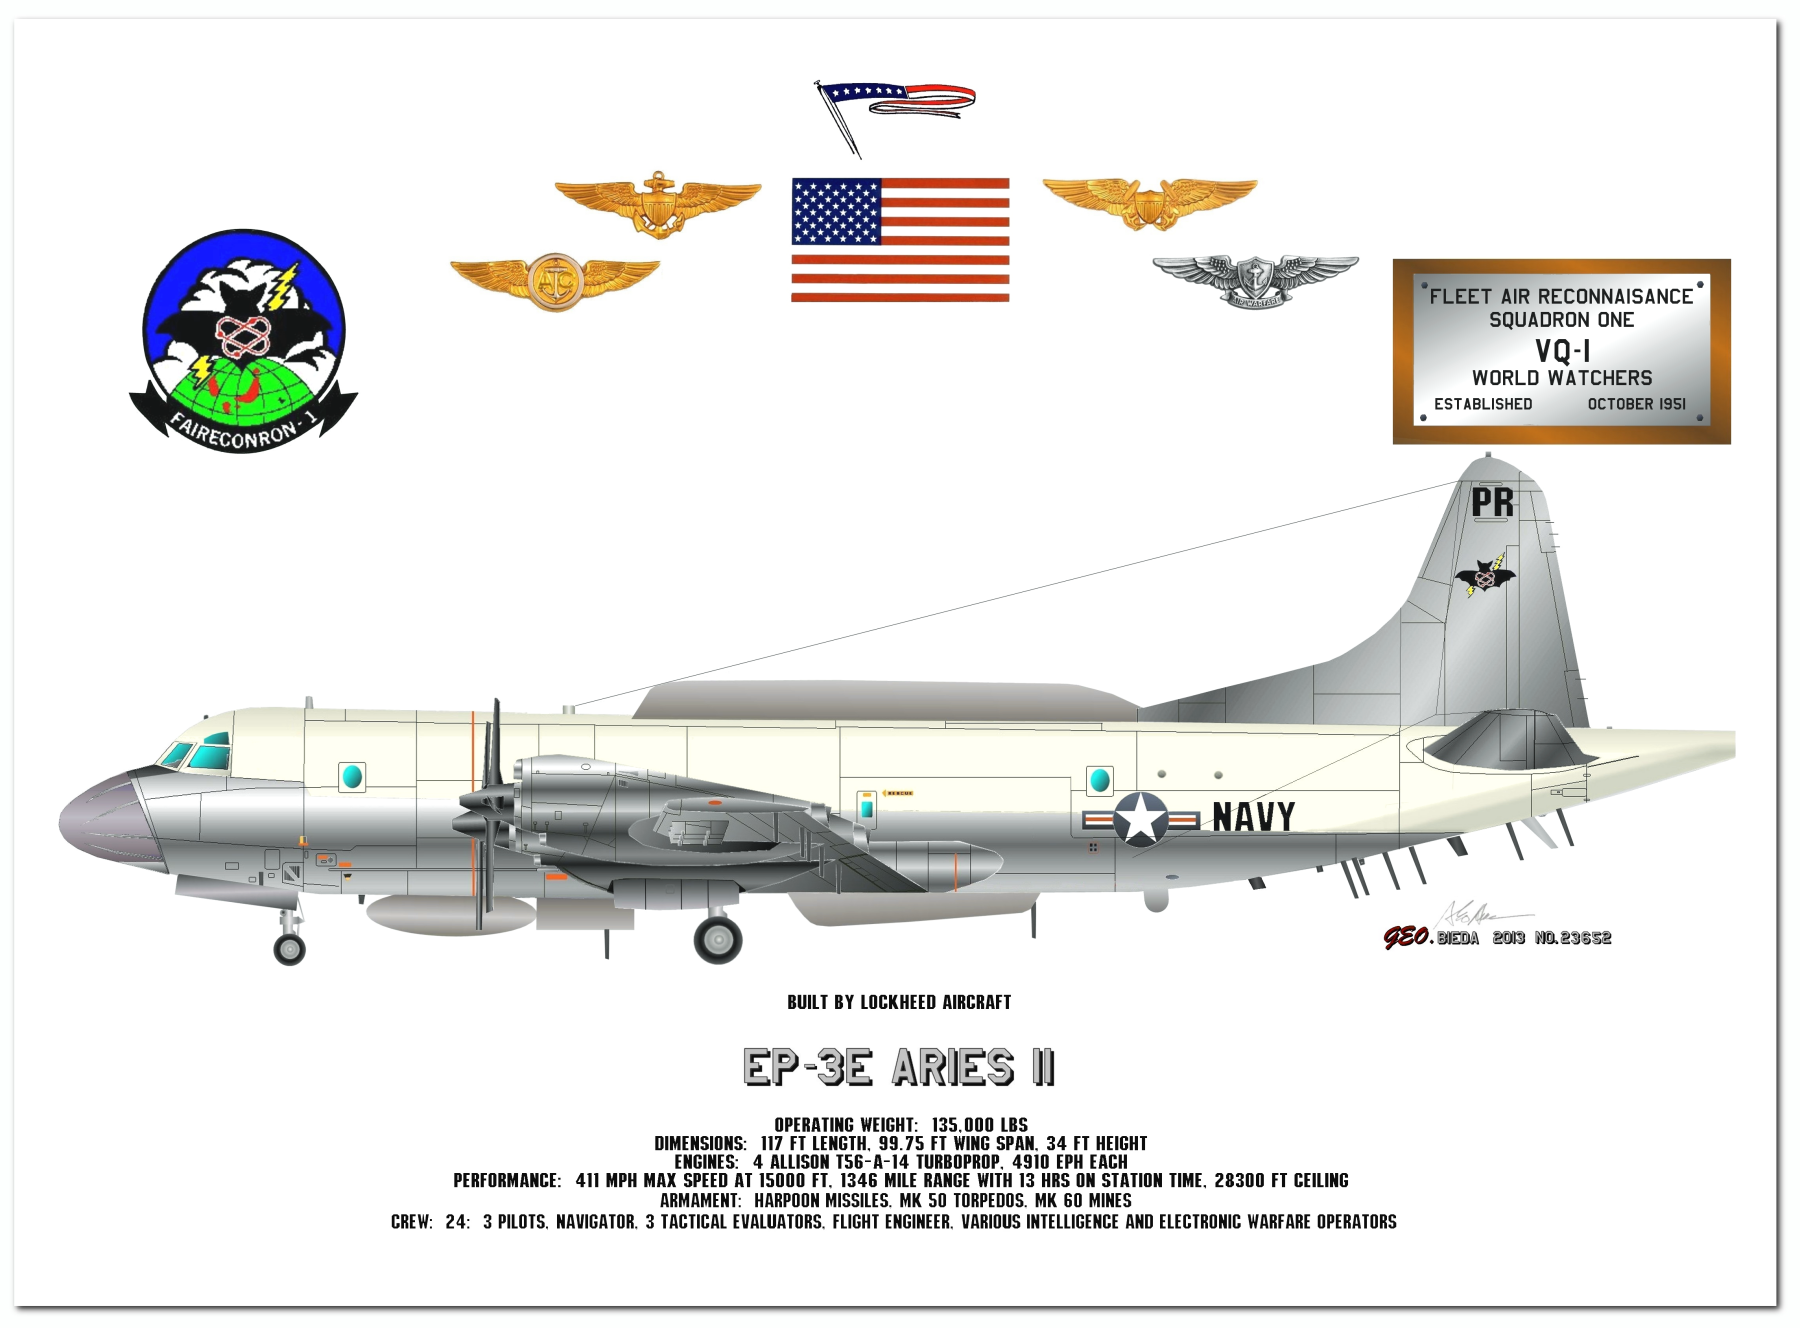 Profile Drawings of the EP-3E Aries II of the VQ-1 World Watchers by George Bieda